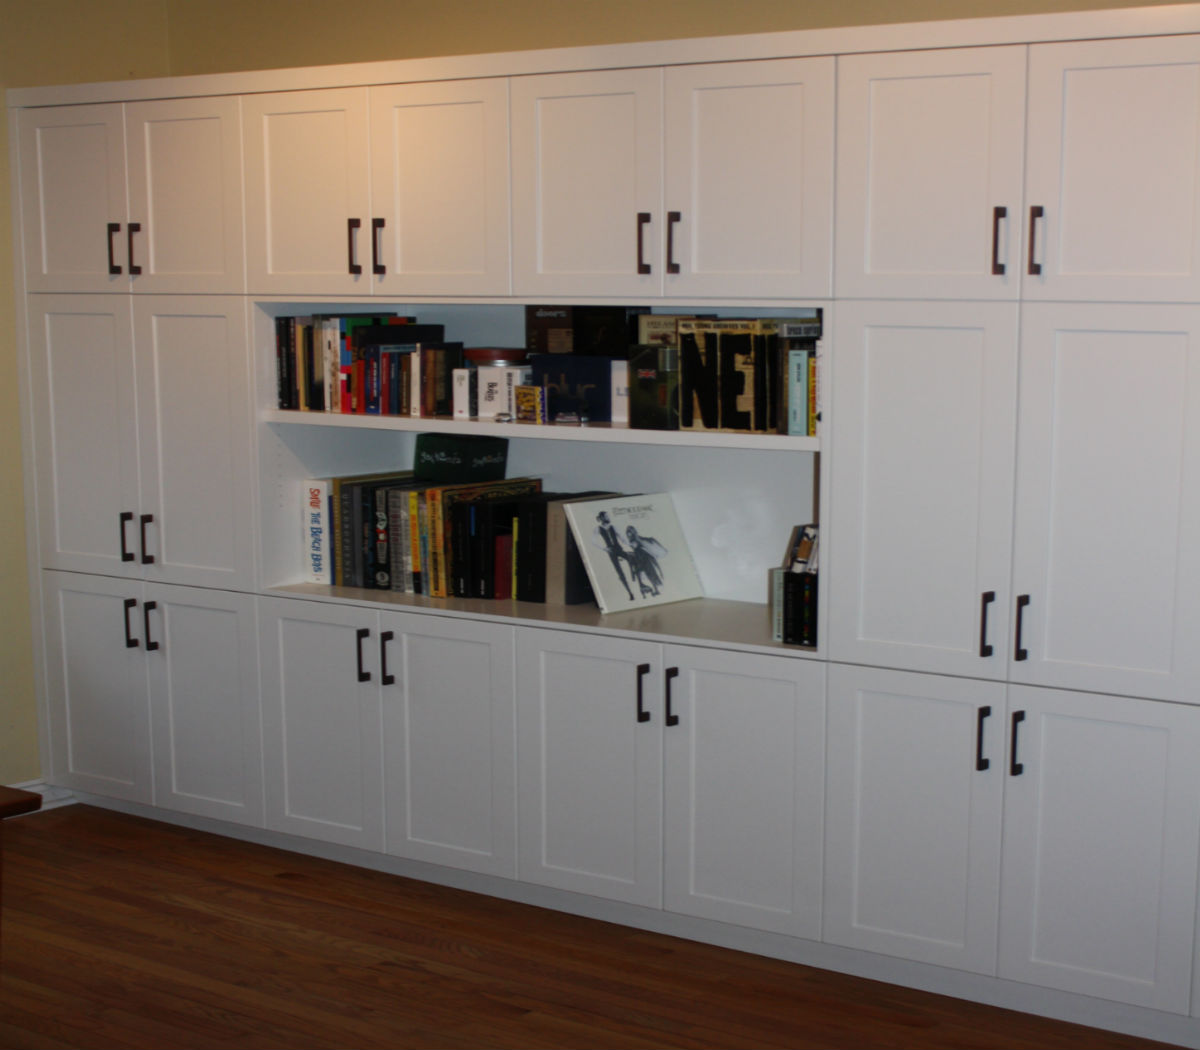 Built-in Wall Unit Shelving